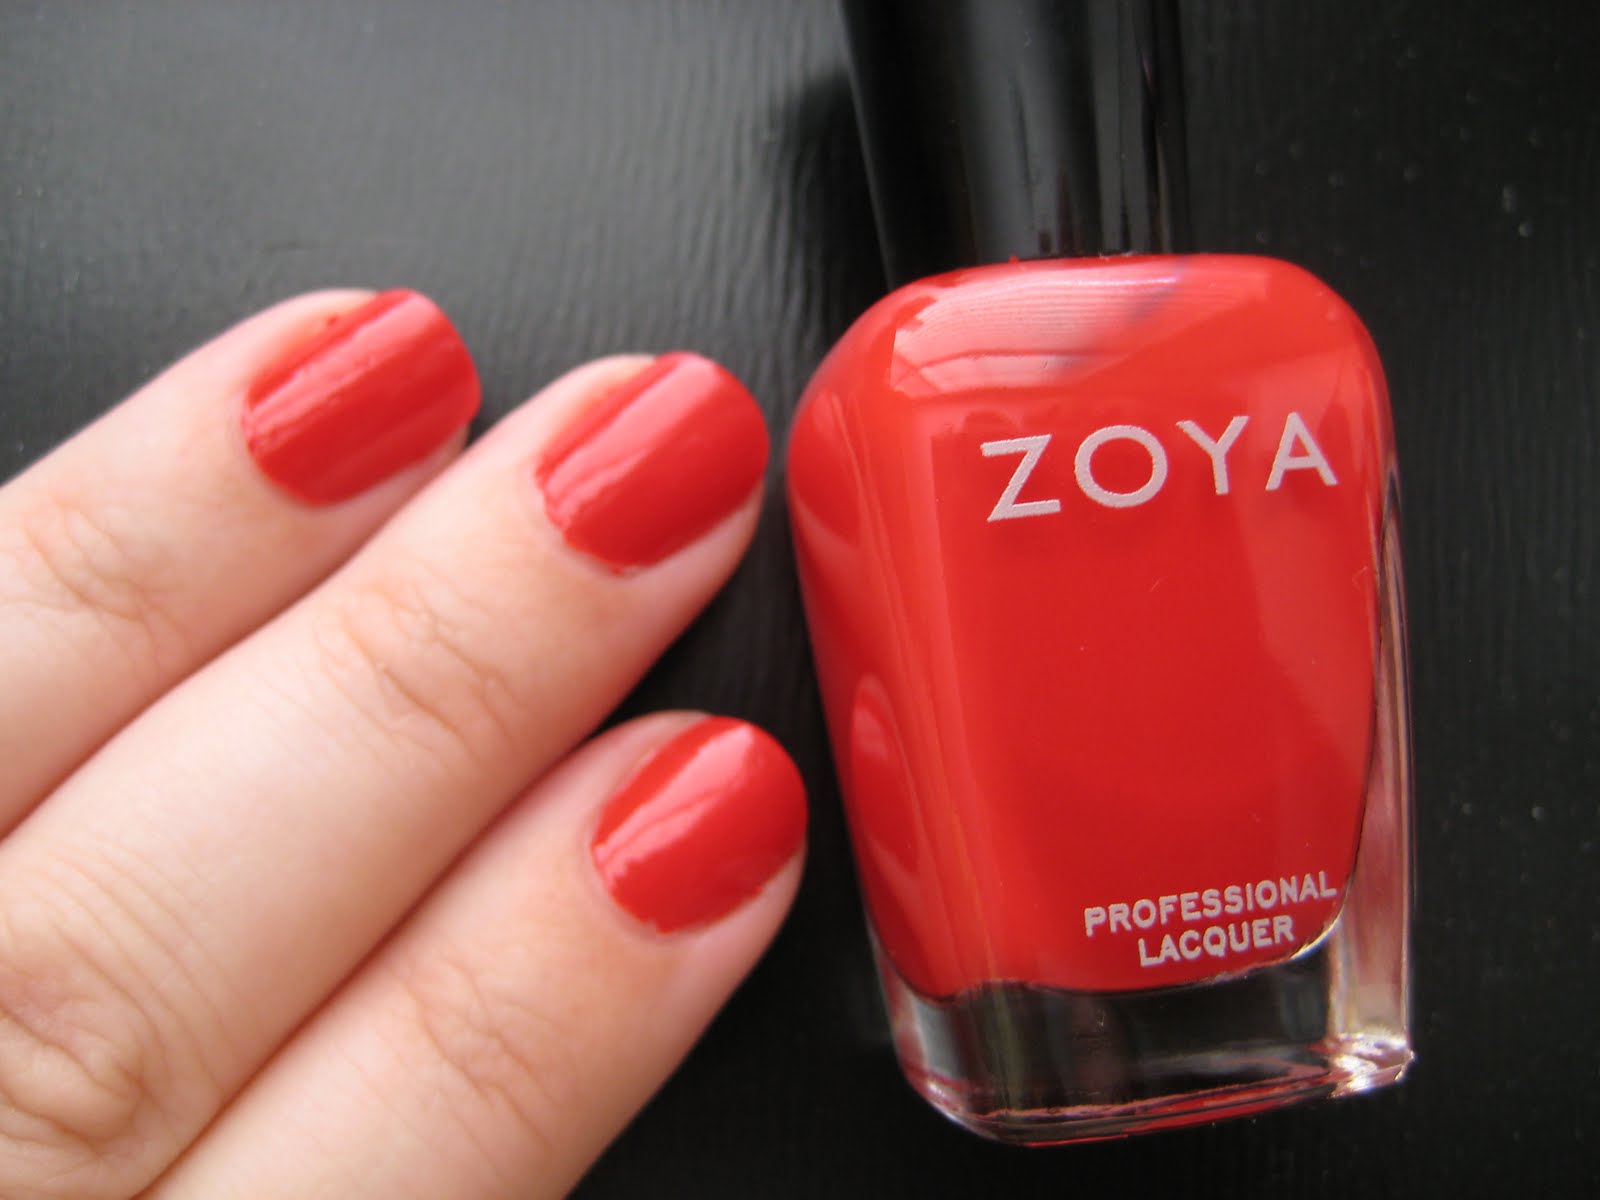 9. Zoya Nail Polish - Professional Nail Lacquer in "Sophisticated" - wide 9